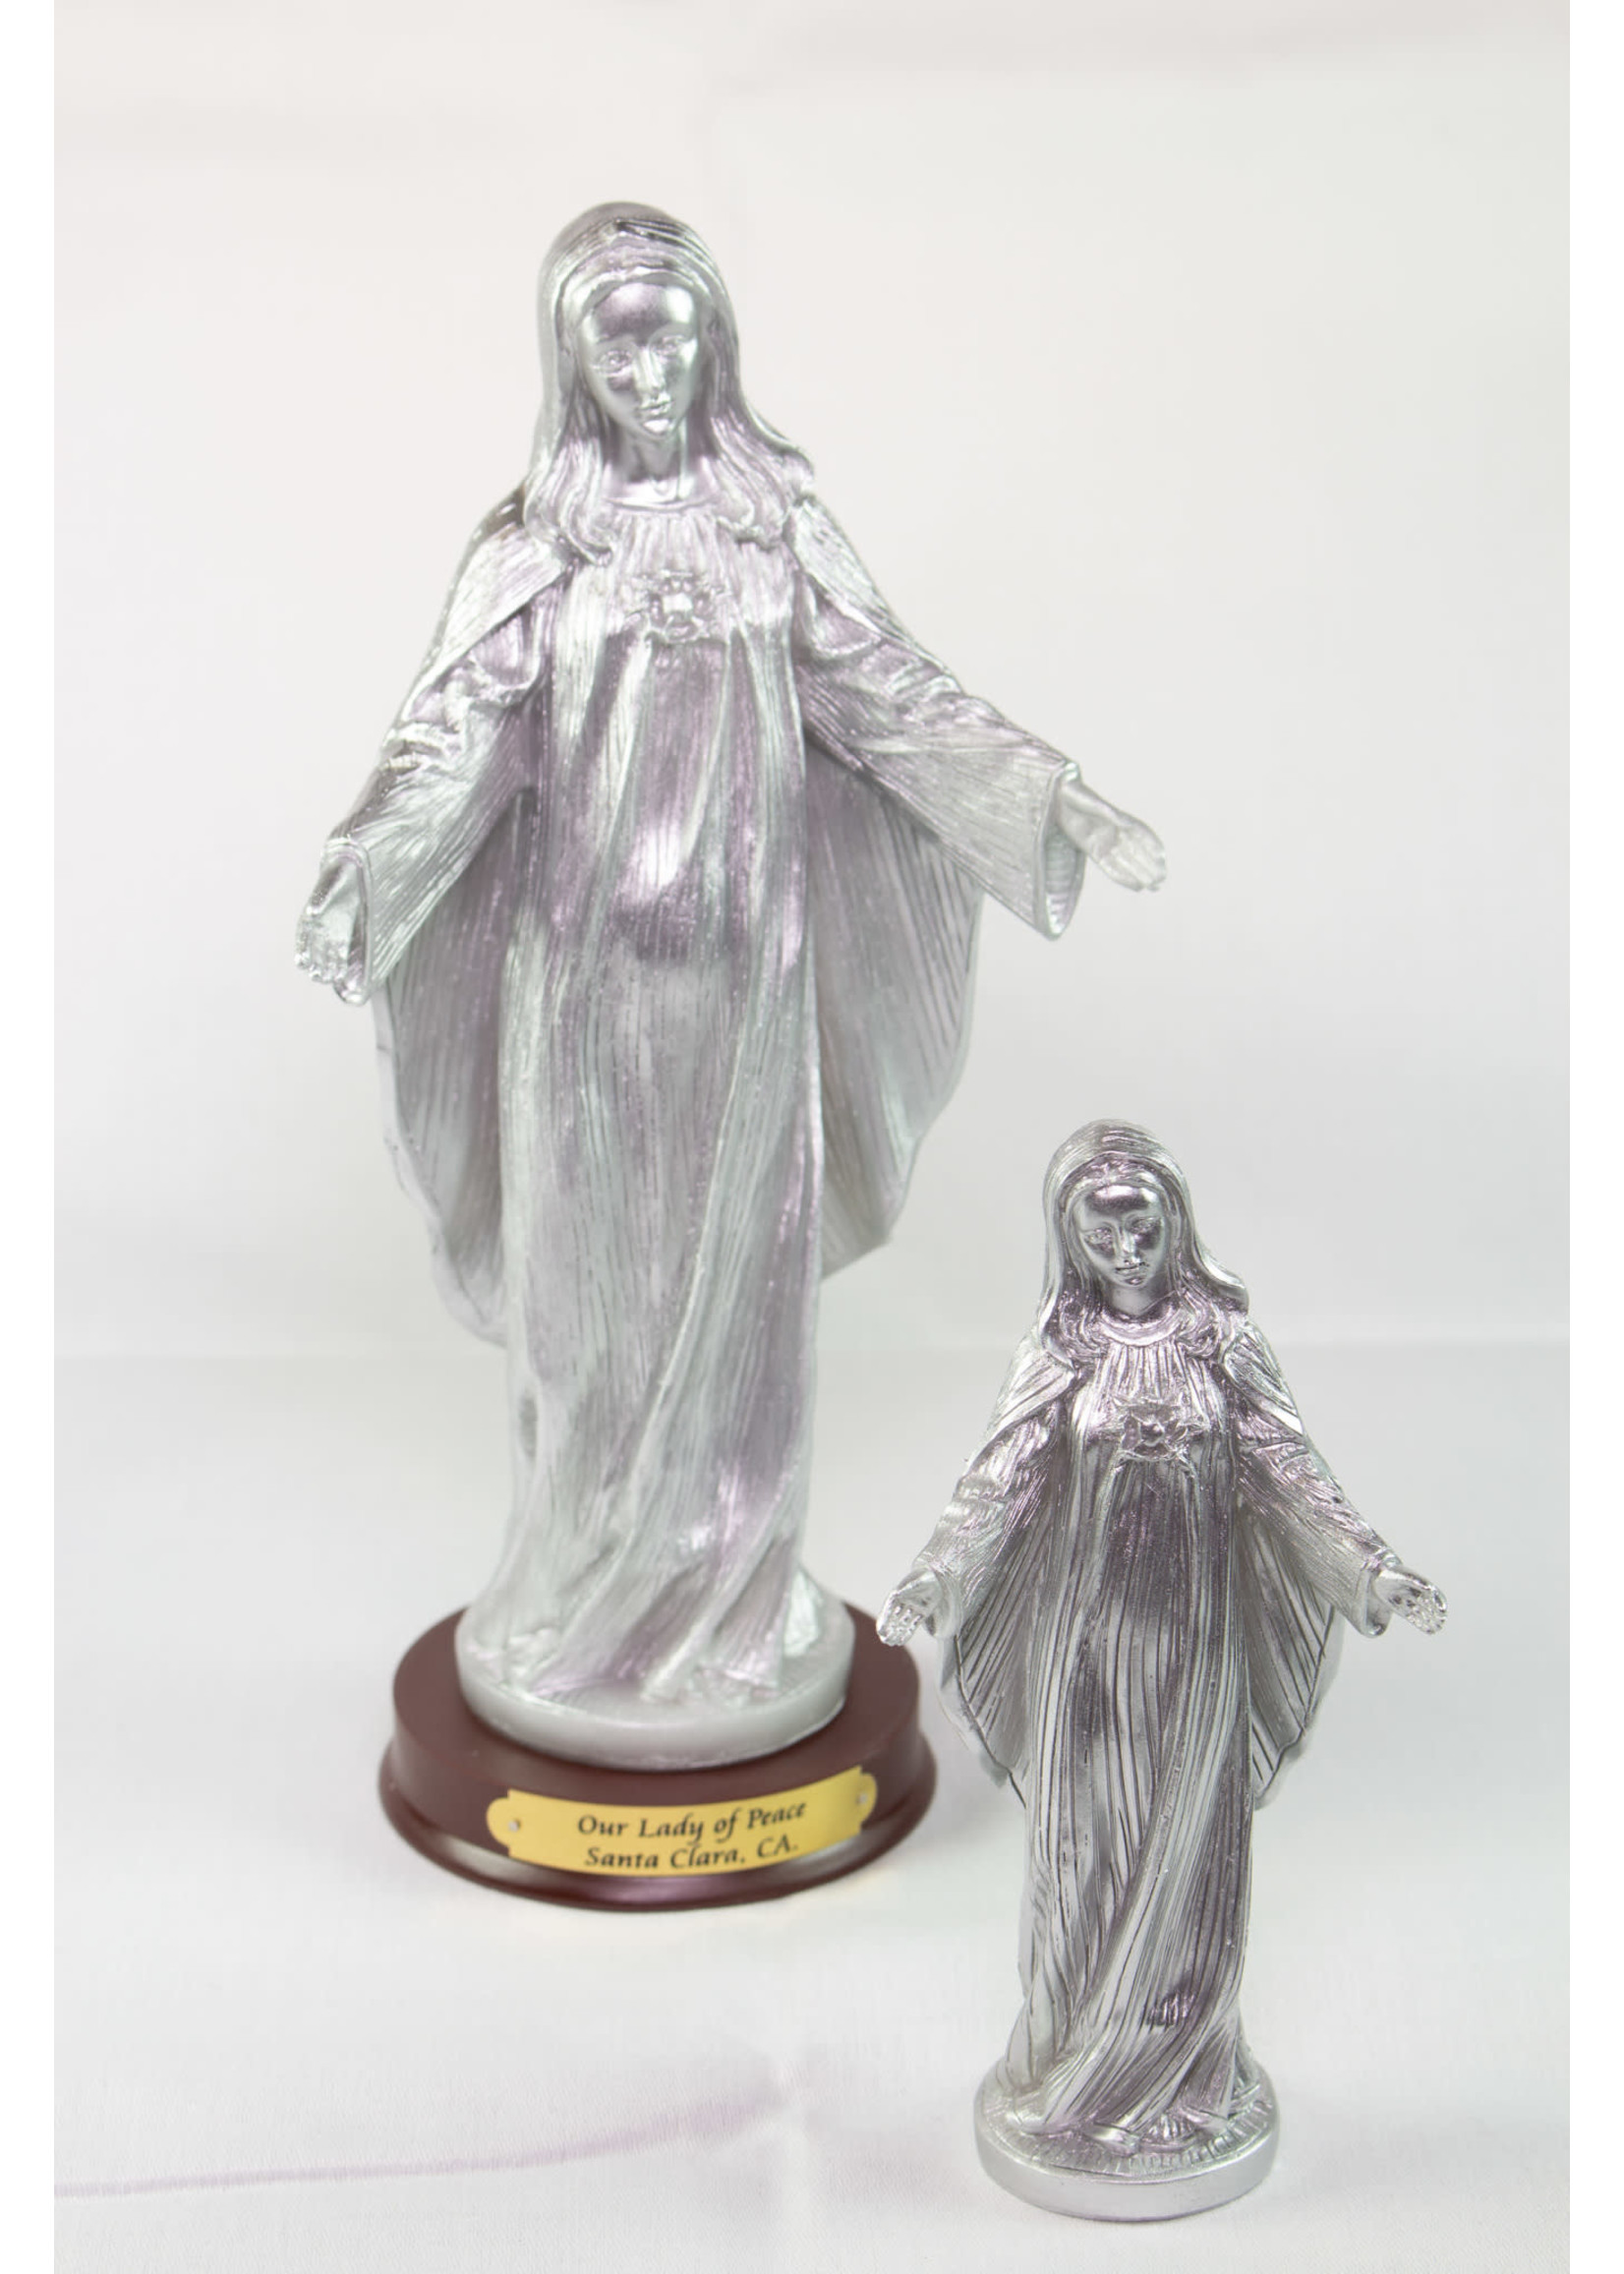 Our Lady of Peace Shrine 5.5" Statue